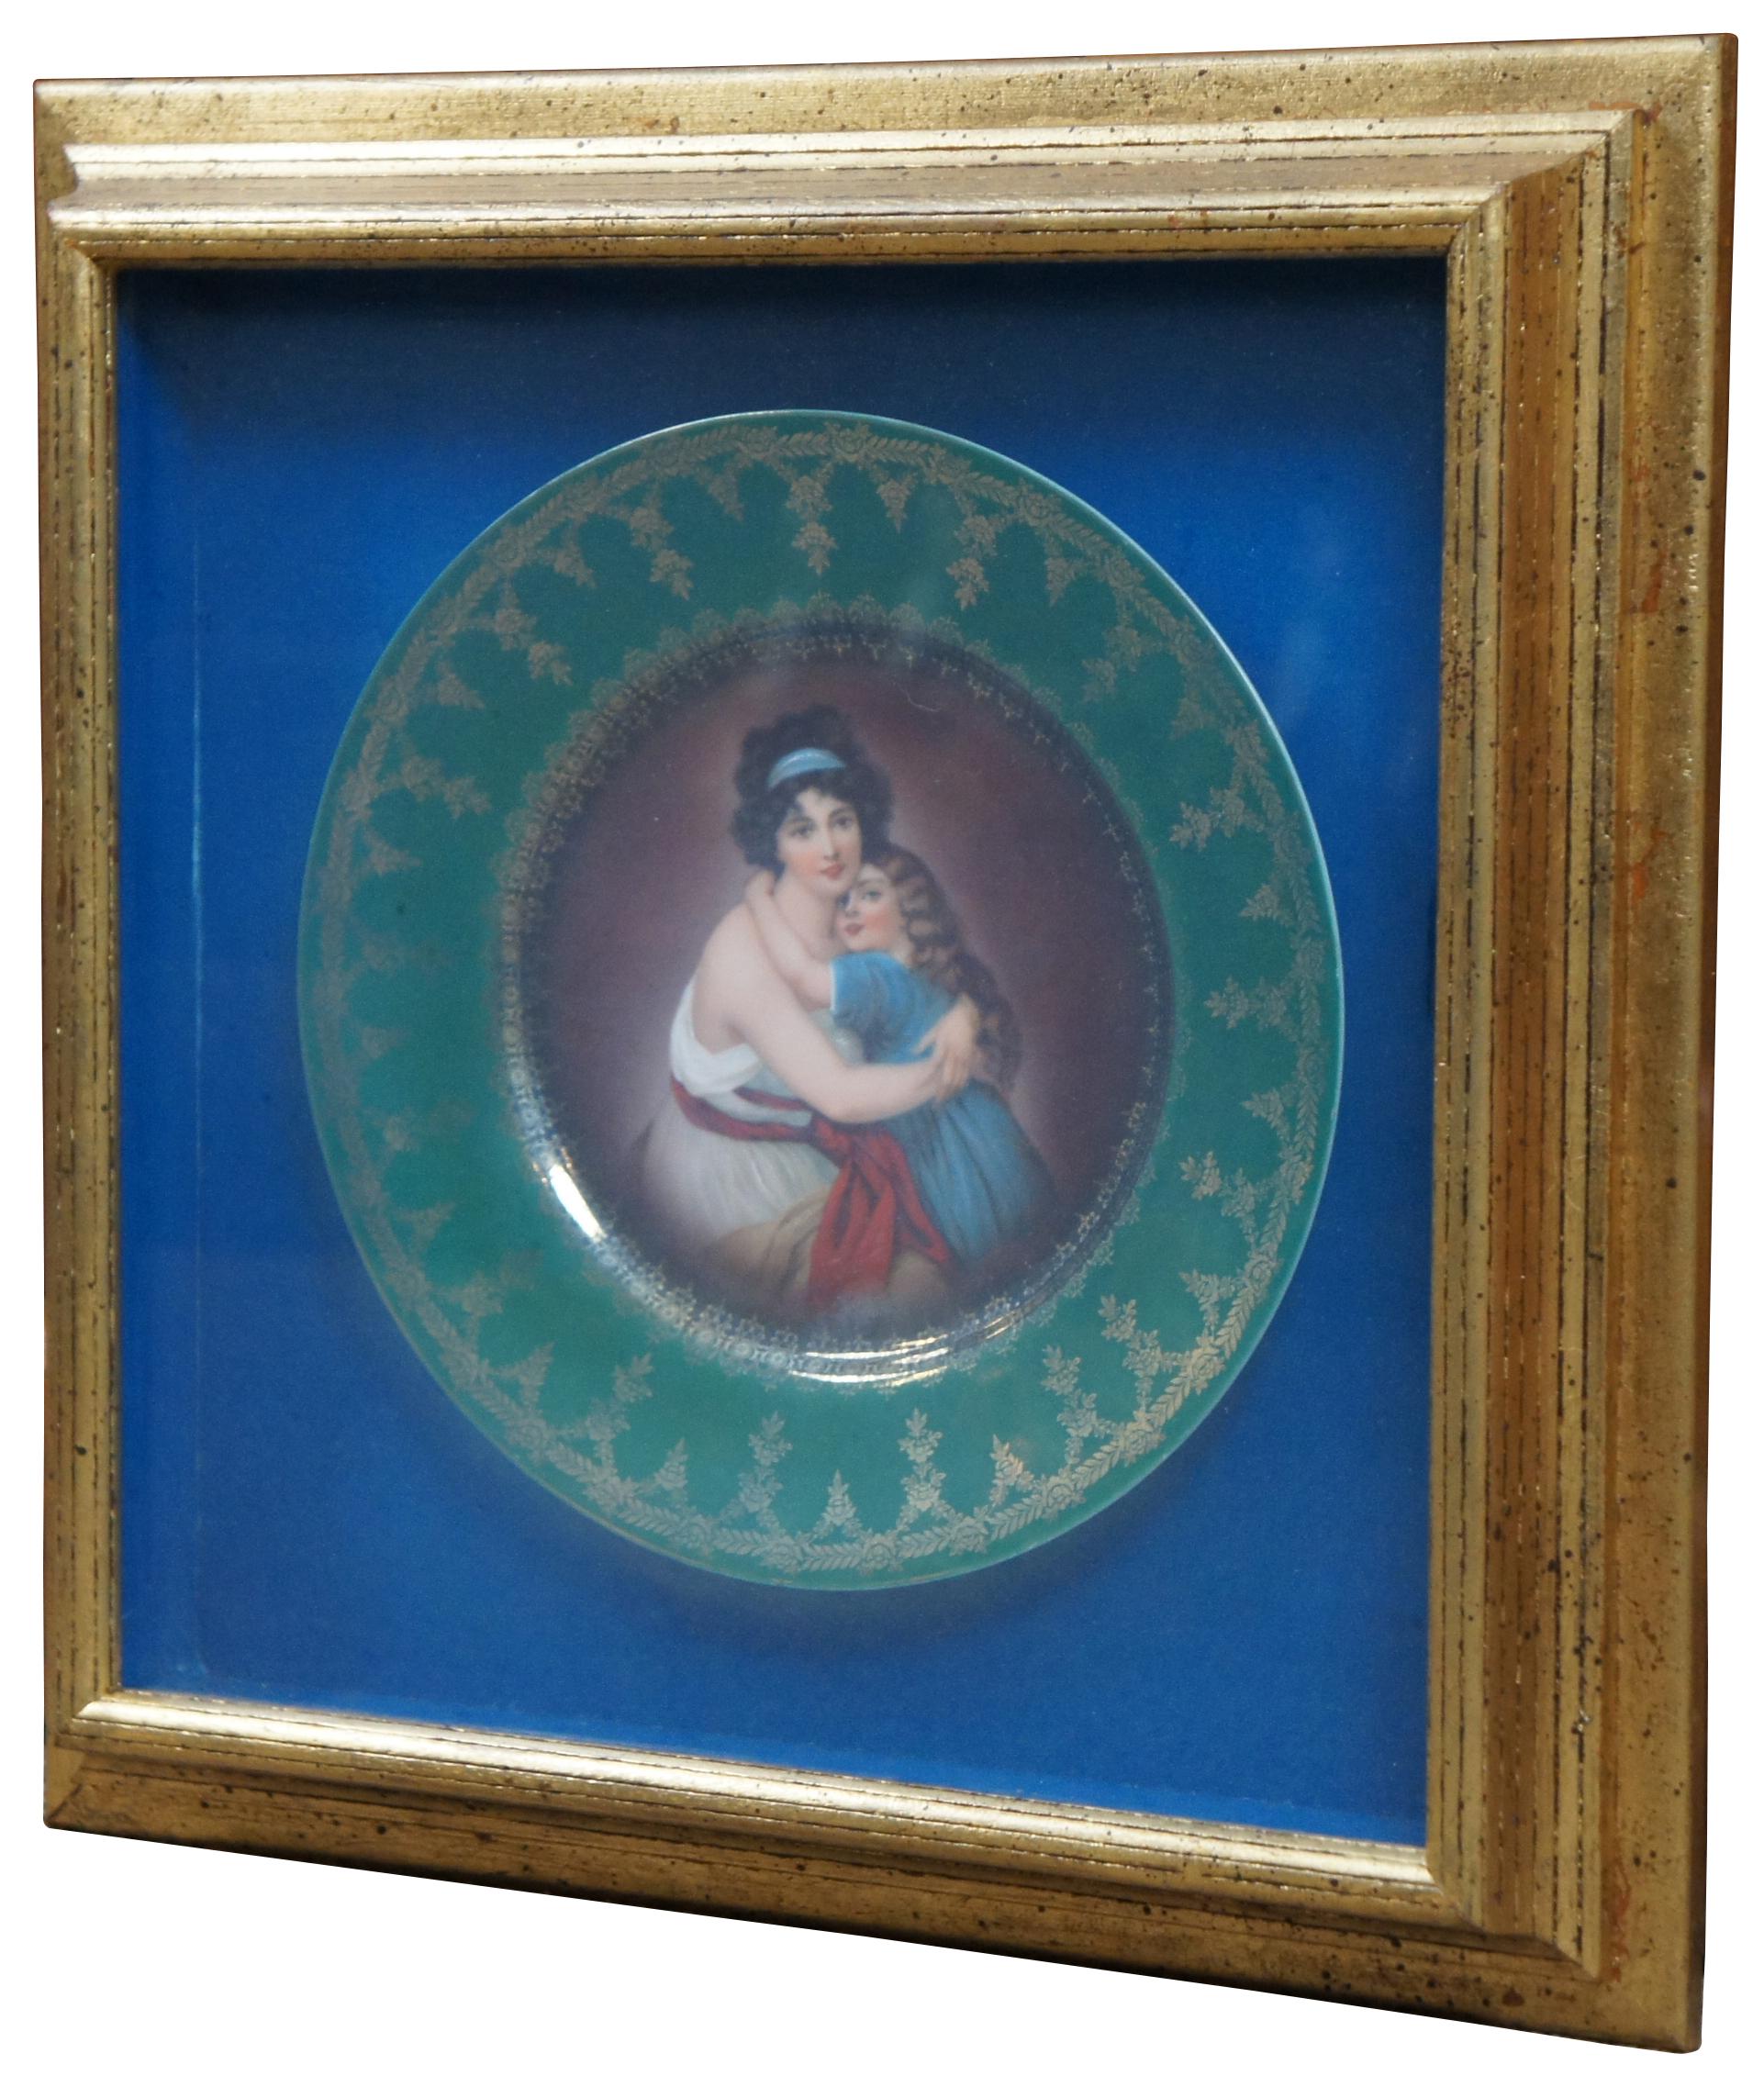 Framed antique 19th century Royal Vienna style plate by Hutschenreuther with beehive mark, in green and gold with a central reproduction of Elisabeth Vigee Le Brun’s 1789 Self Portrait with Her Daughter Julie.

Measures: 15.75” x 2.25” x 15.75” /